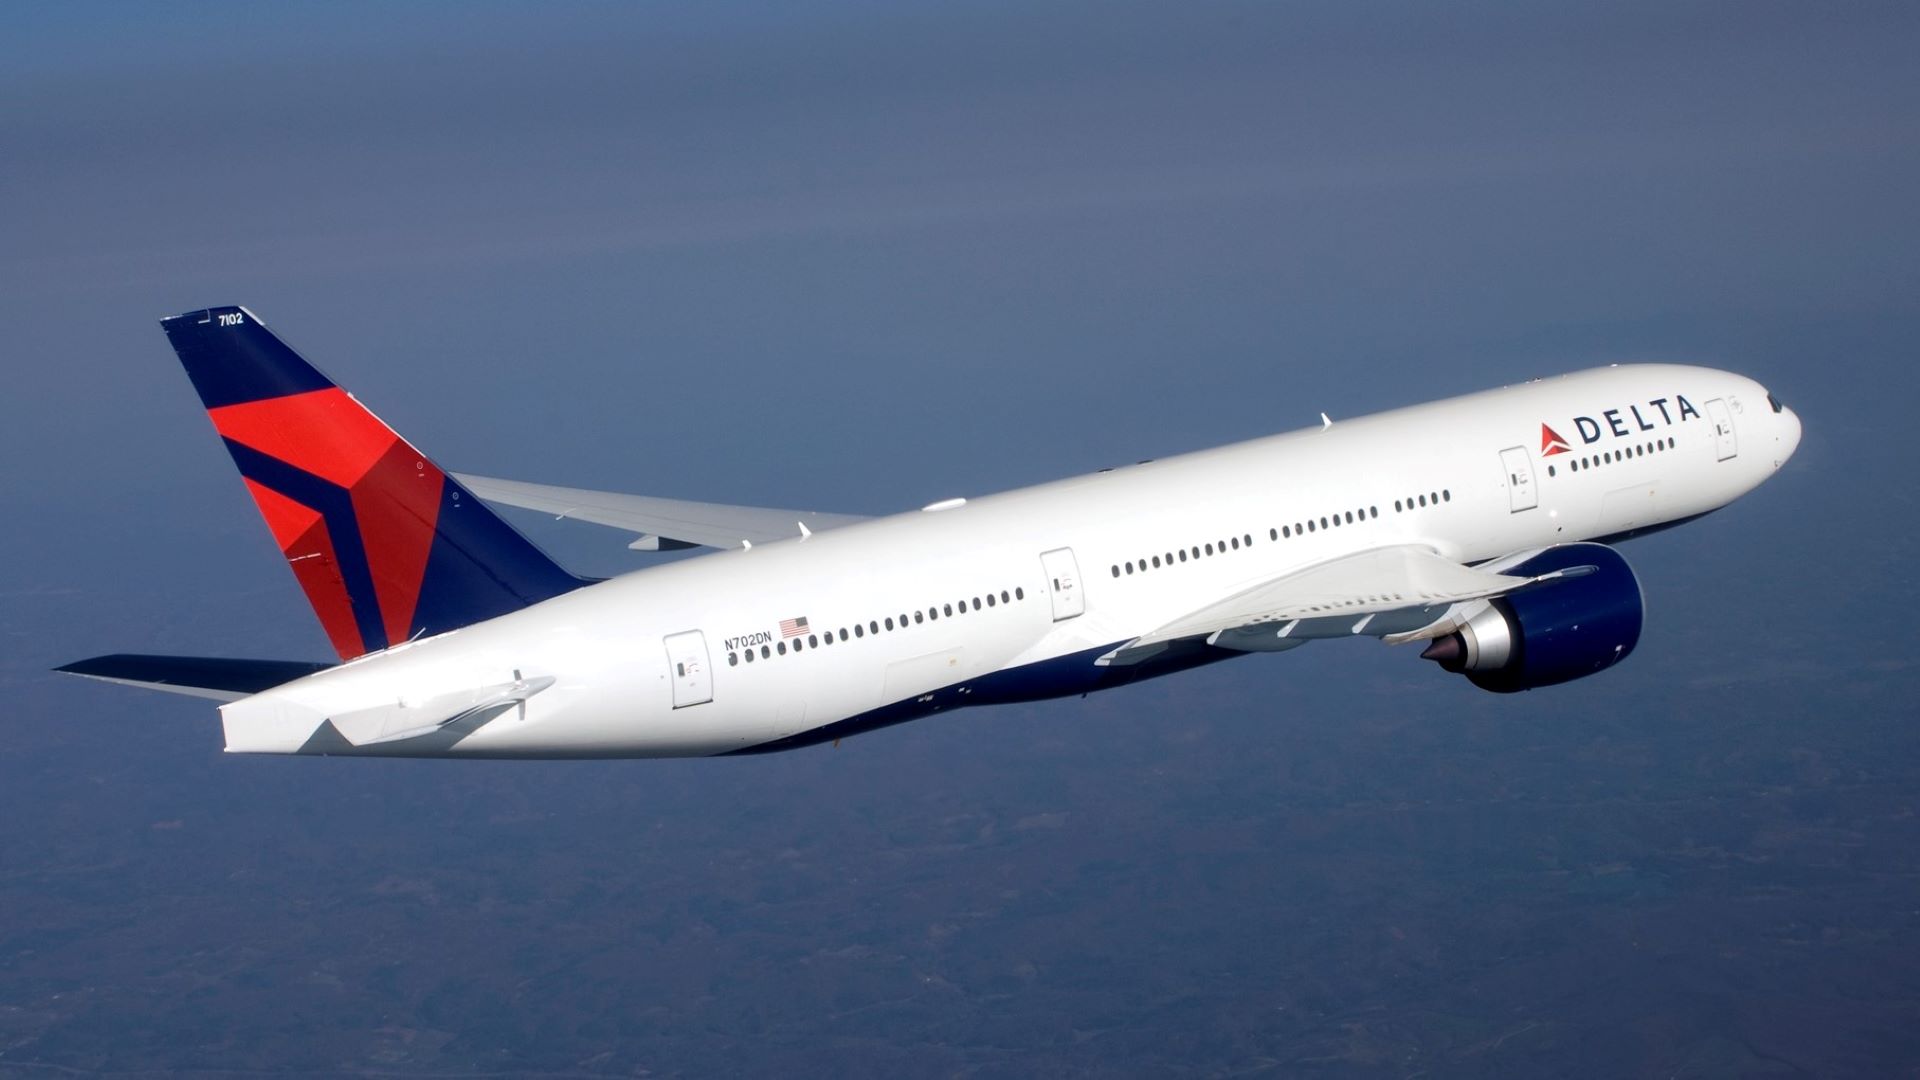 A Delta Air Lines jet with white body and blue/red tail in flight, as viewed from side rear.